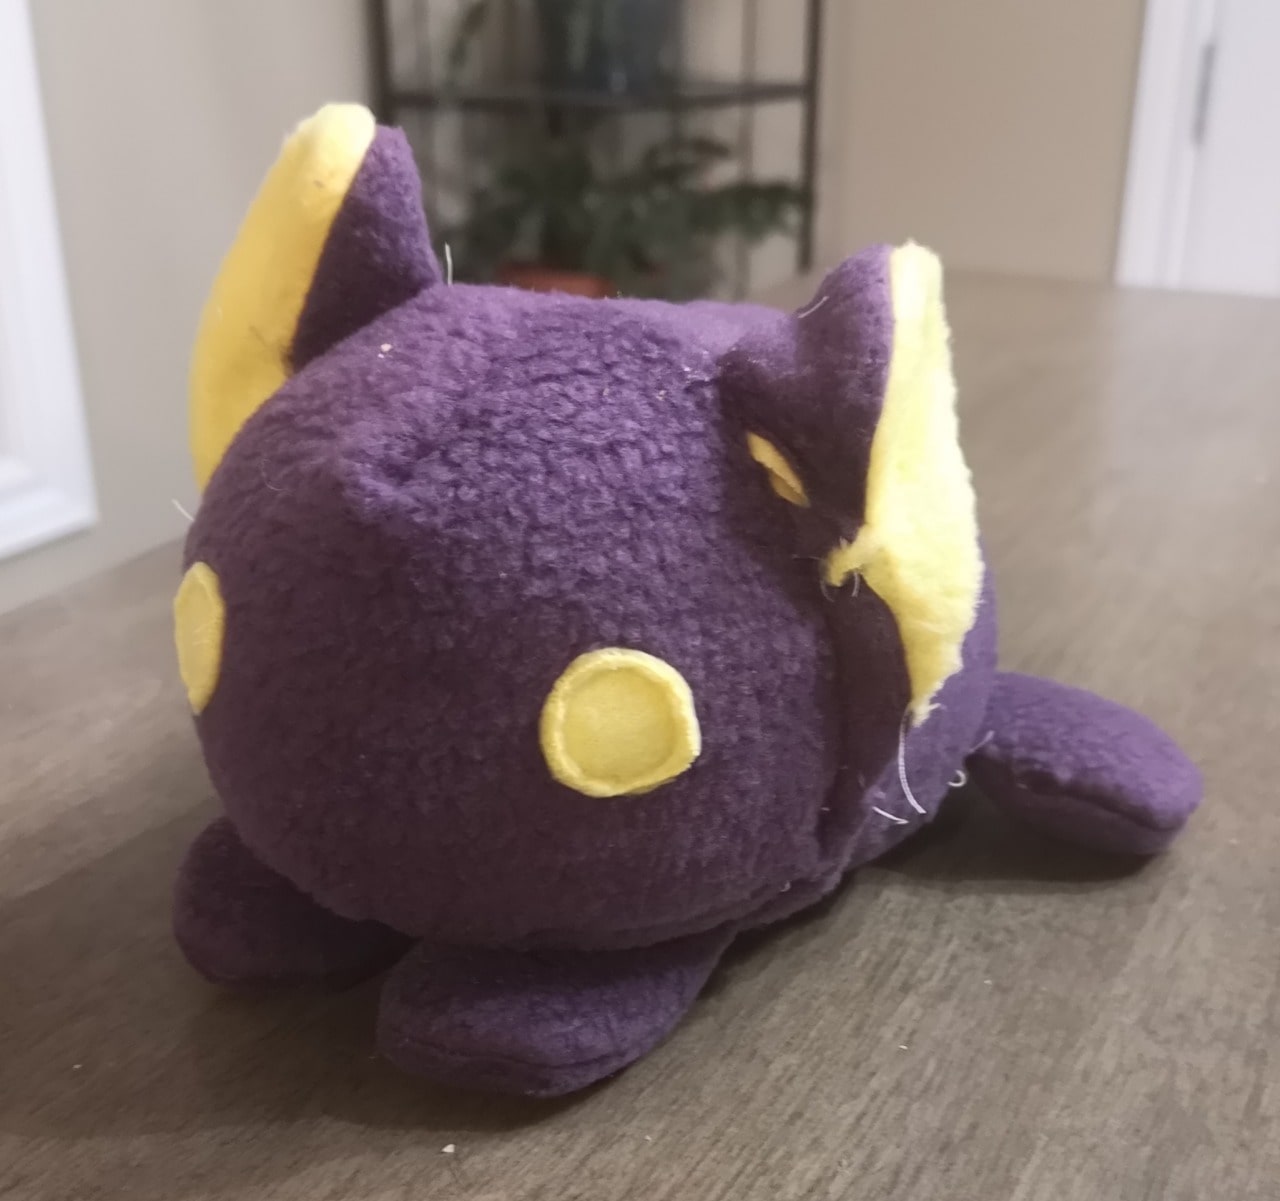 lumpy purple plush with round yellow eyes that vaguely resembles a cat